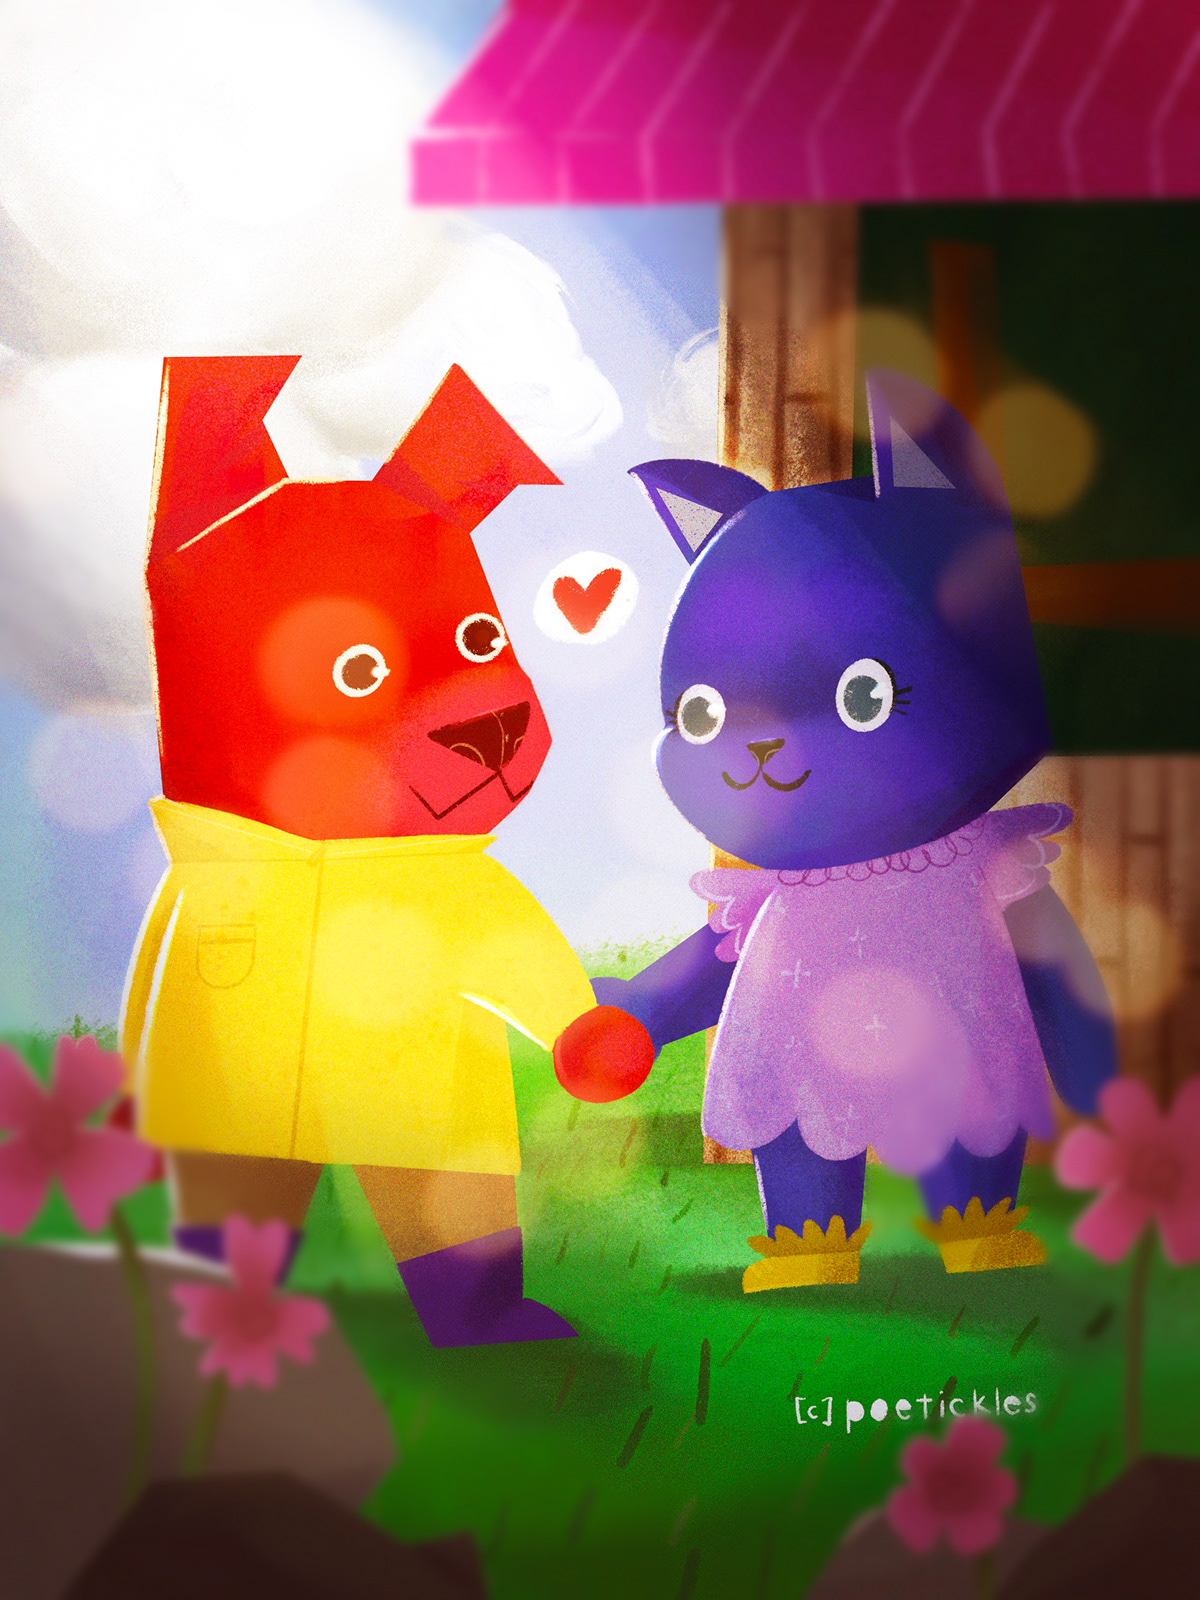 Cat and Dog Character design  children illustration cute animals Digital Art  illlustration kitten Picture book Puppy Love story